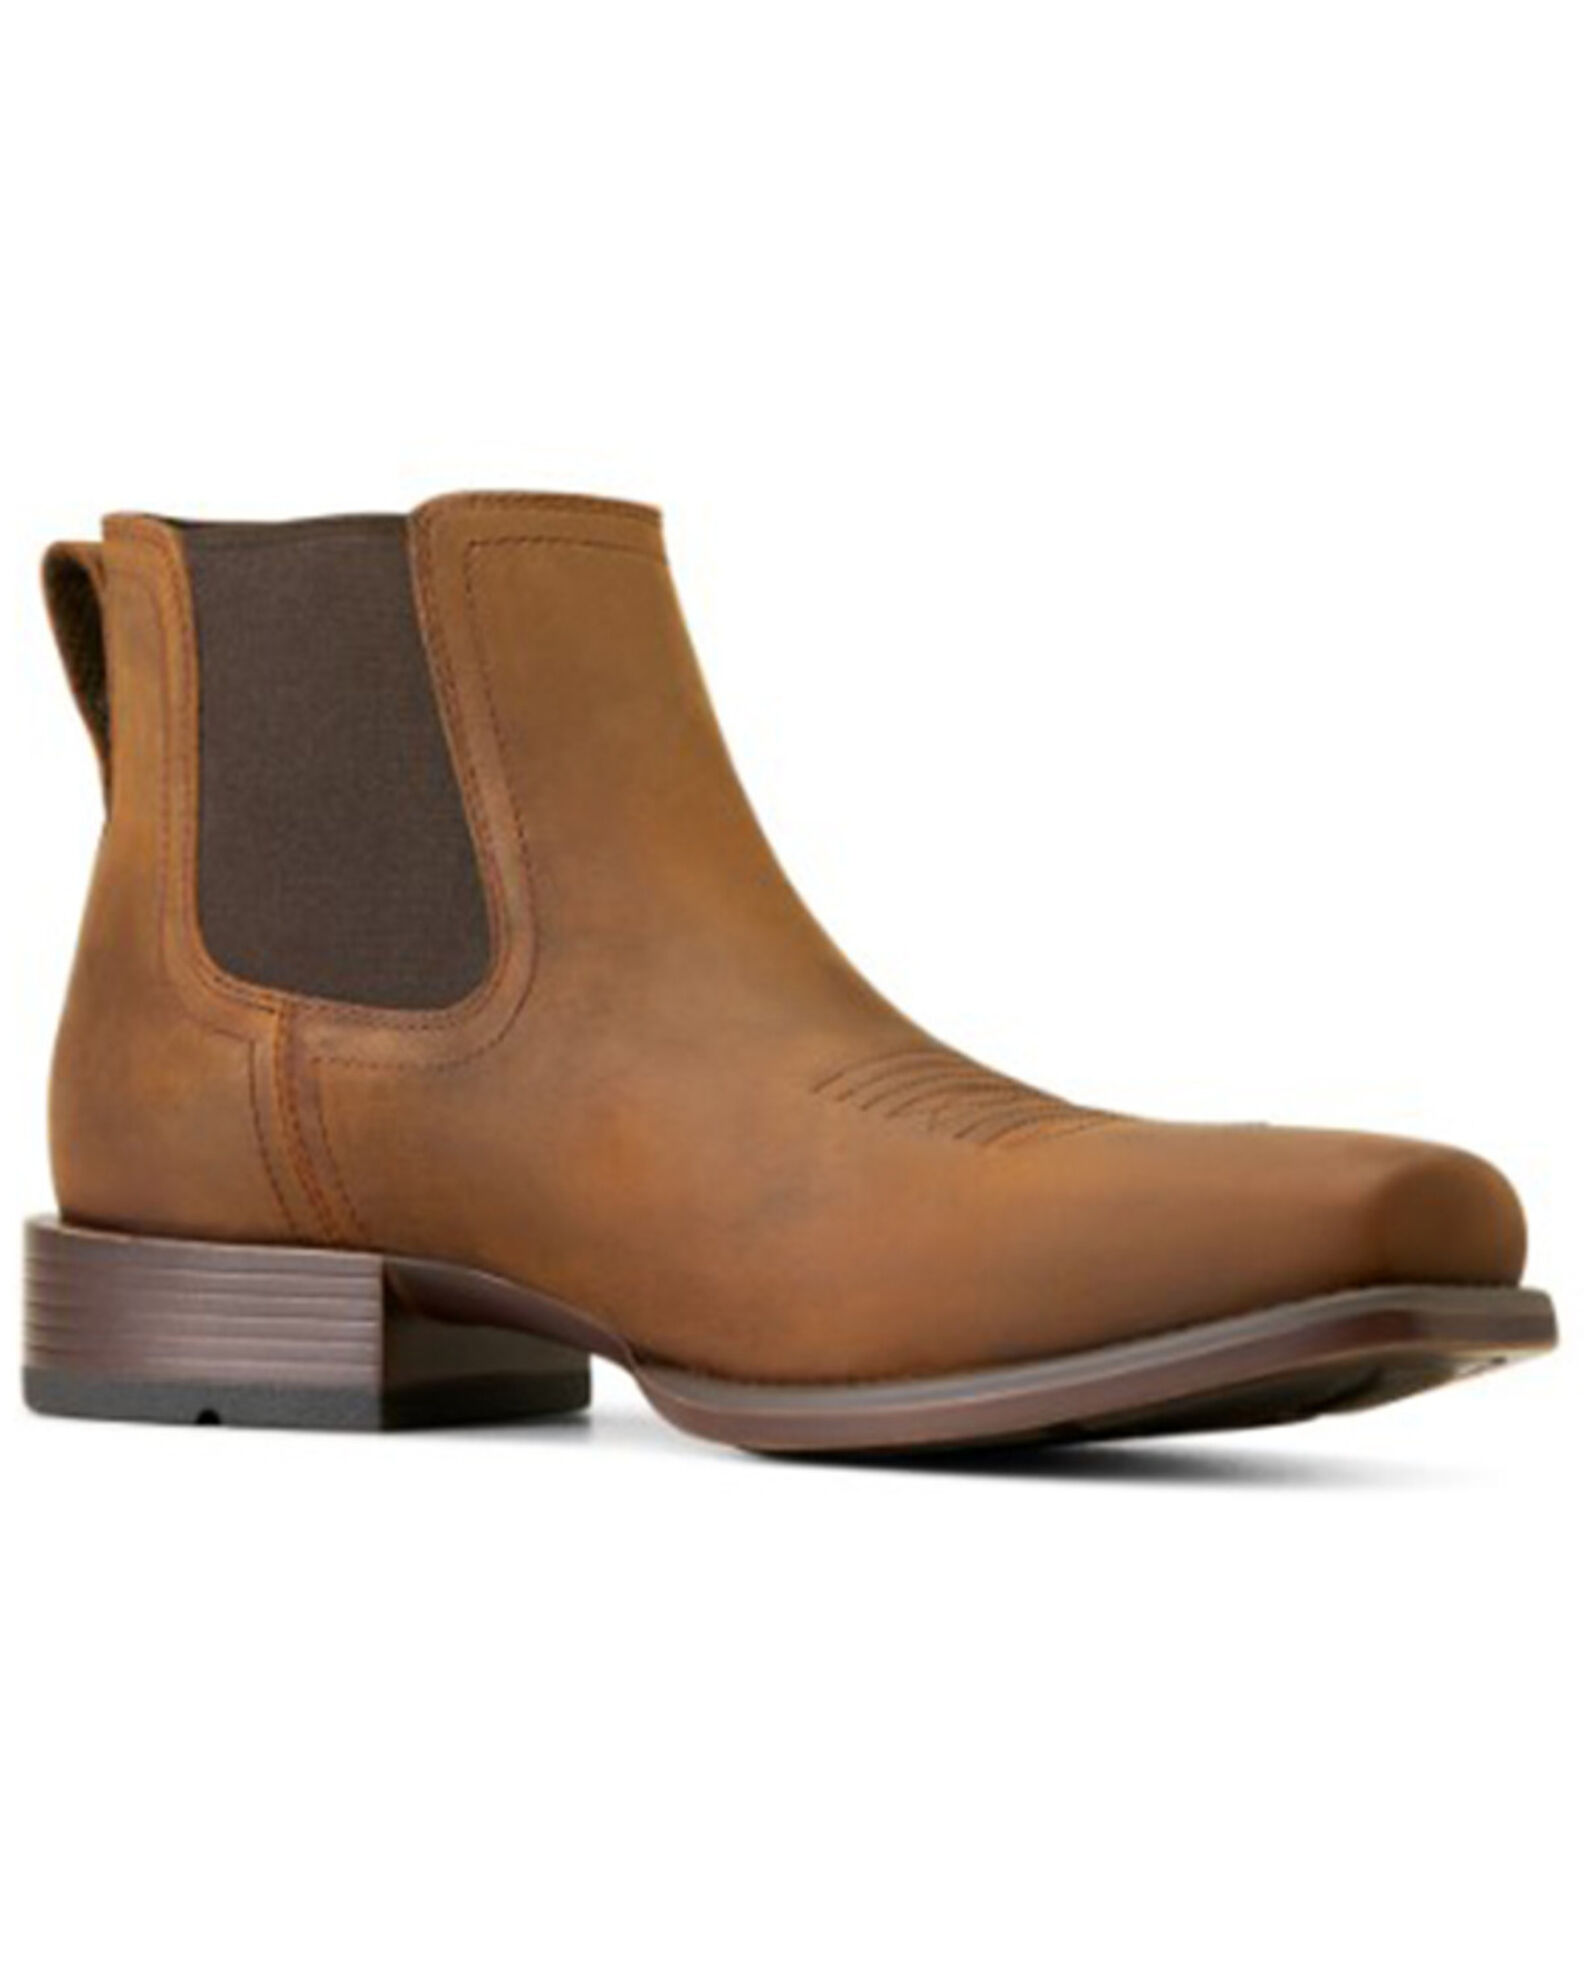 Product Name: Ariat Men's Booker Ultra Chelsea Boots - Square Toe